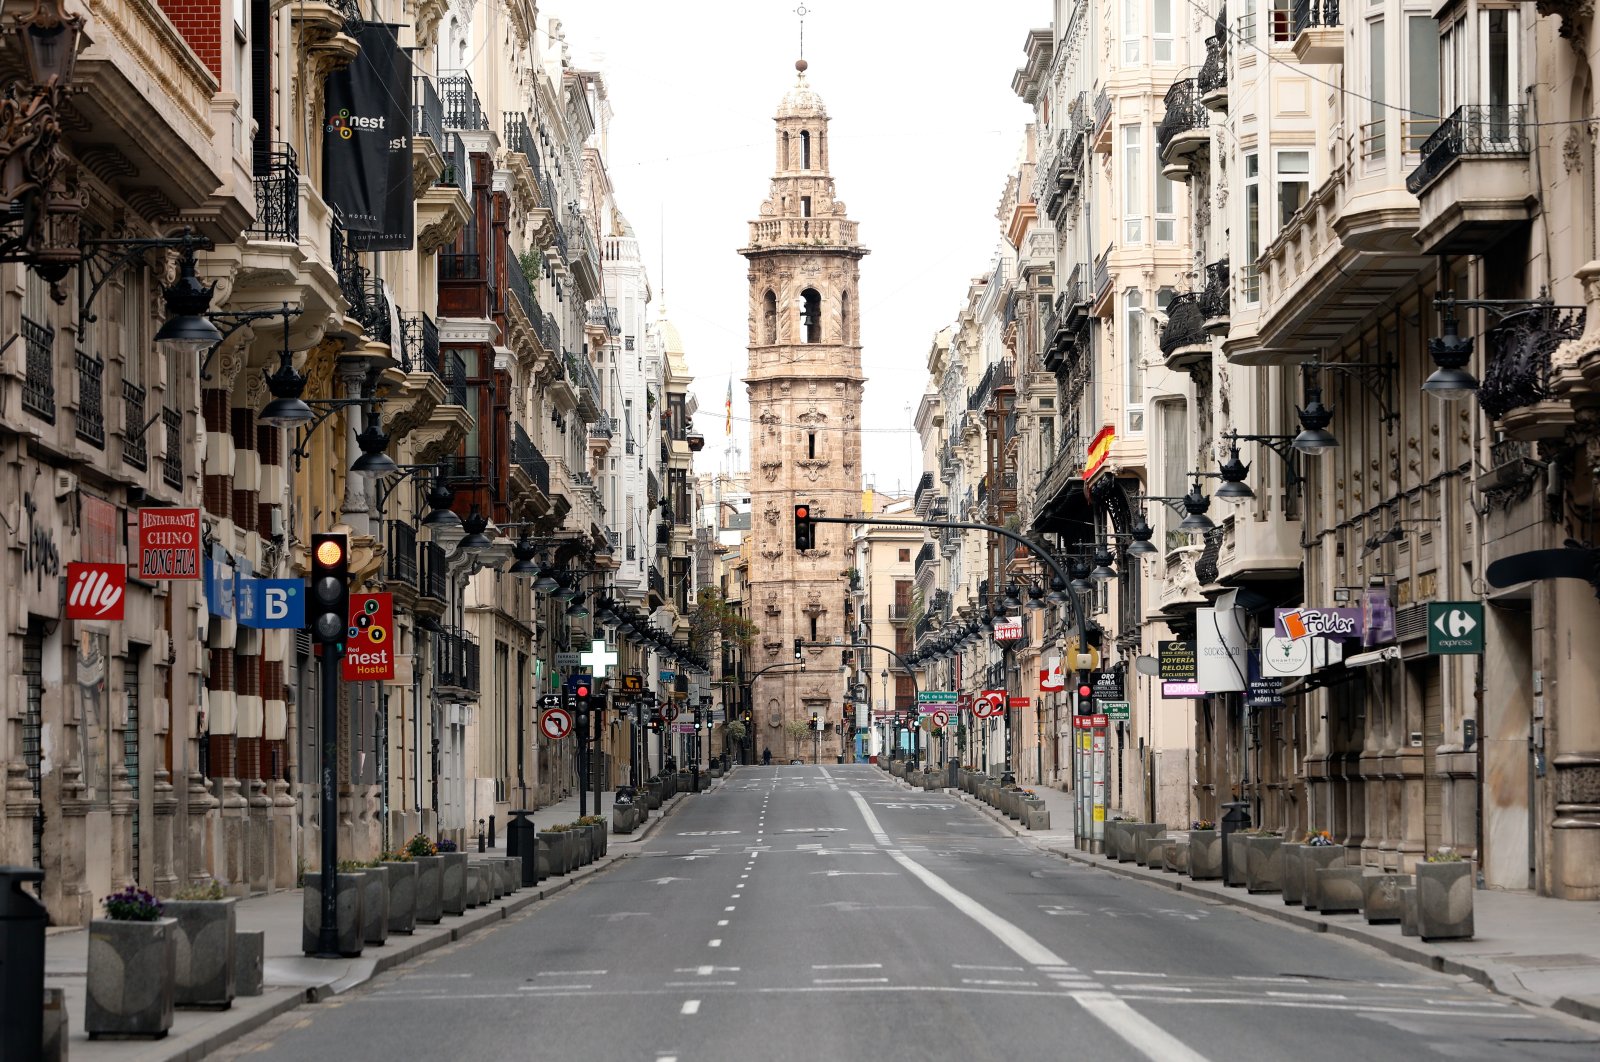 View of a church tower at the end of a deserted street in Valencia, eastern Spain, April 11, 2020. For the first time in centuries, many church bells across Spain will not be ringing on the eve of Easter Sunday, as most bell-ringers won't be able to access their churches and cathedrals due to the nationwide lockdown imposed by the government in a bid to slow down the spread of the pandemic COVID-19 disease. (EPA Photo)